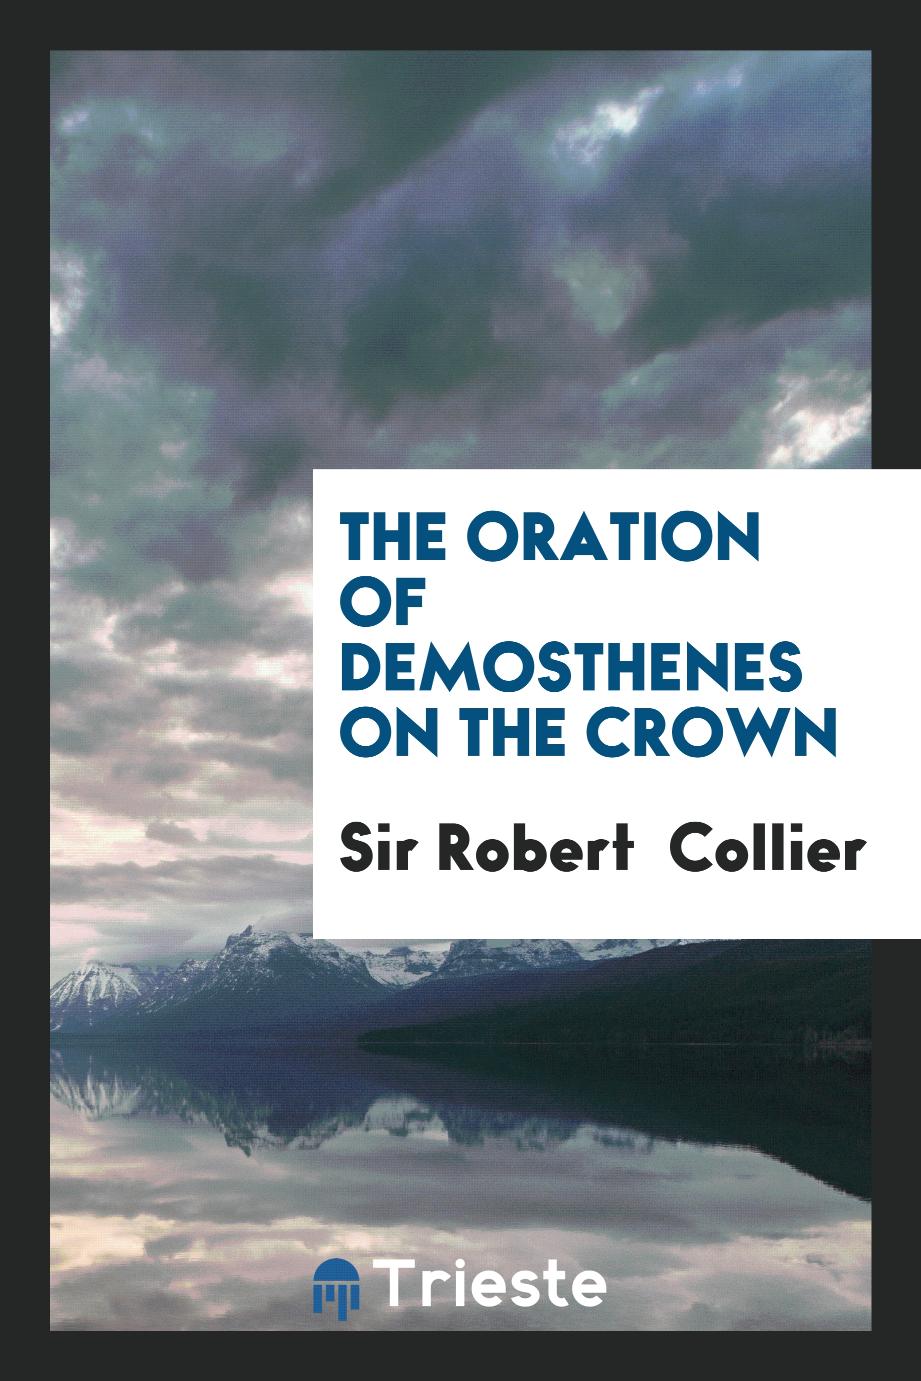 The Oration of Demosthenes on The Crown